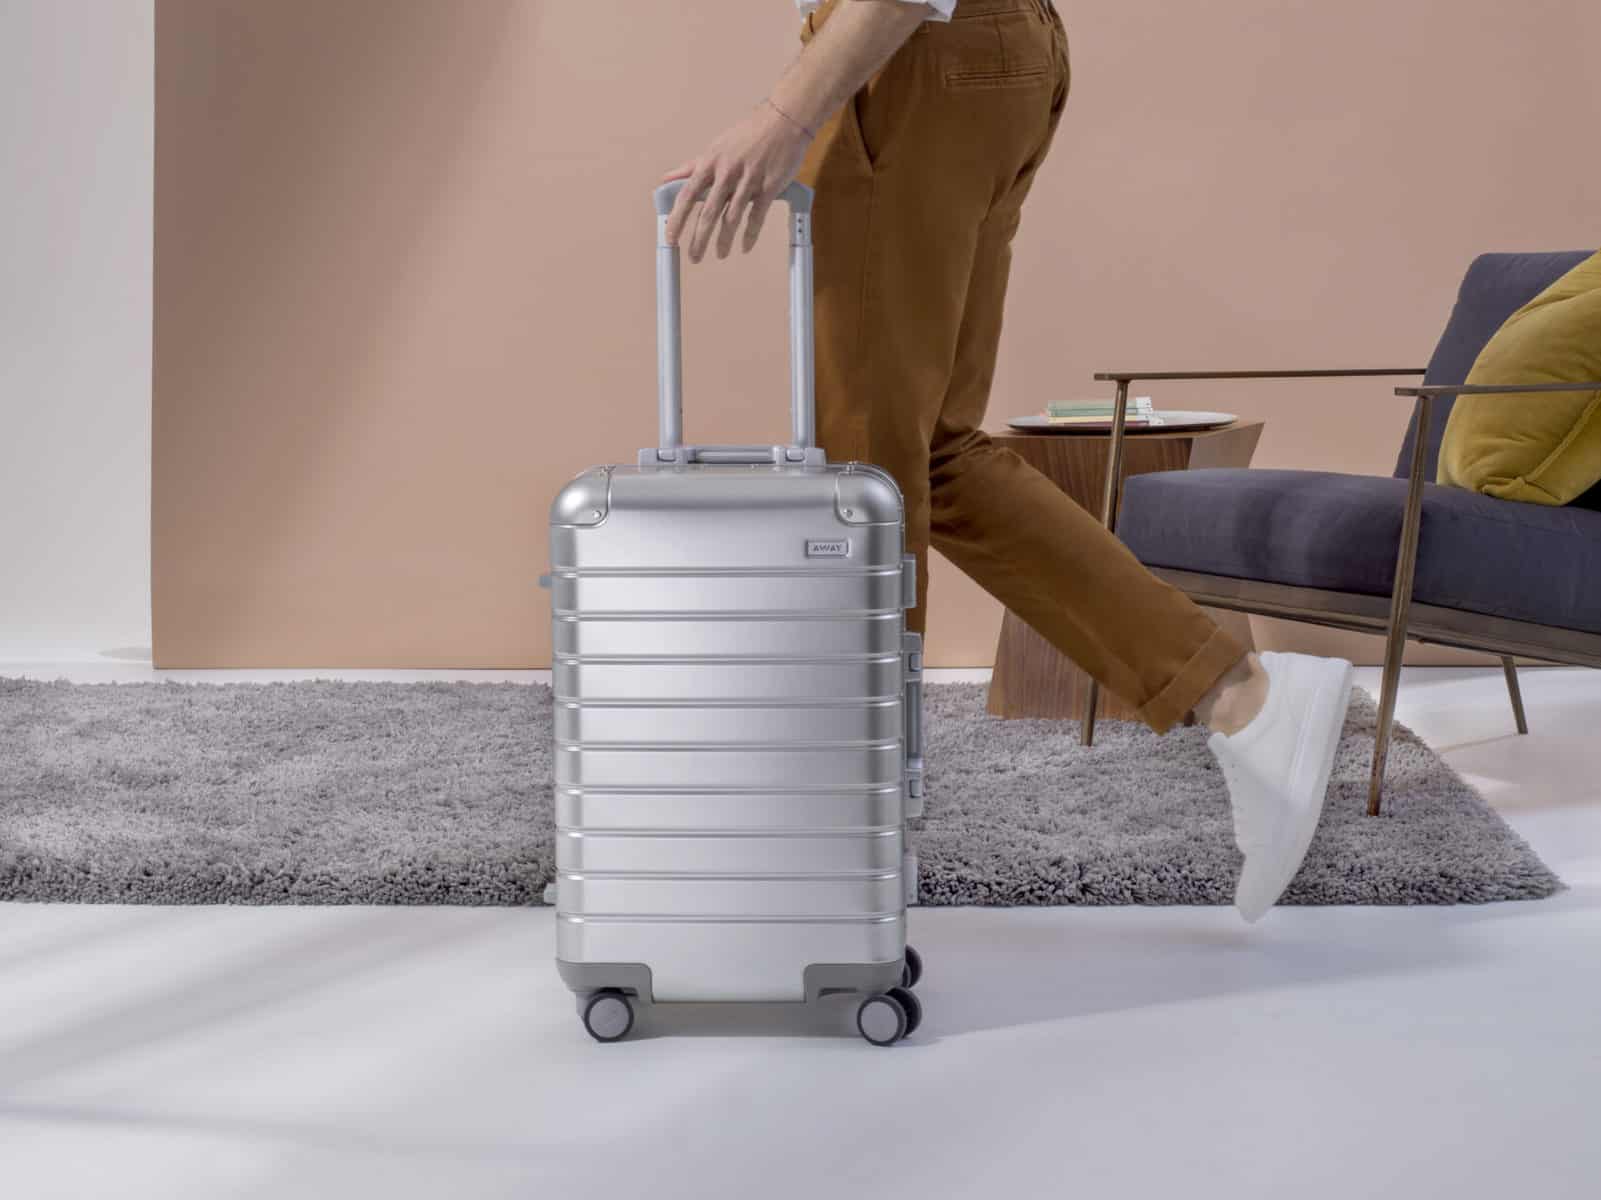 Away Aluminum Carry-on Luggage